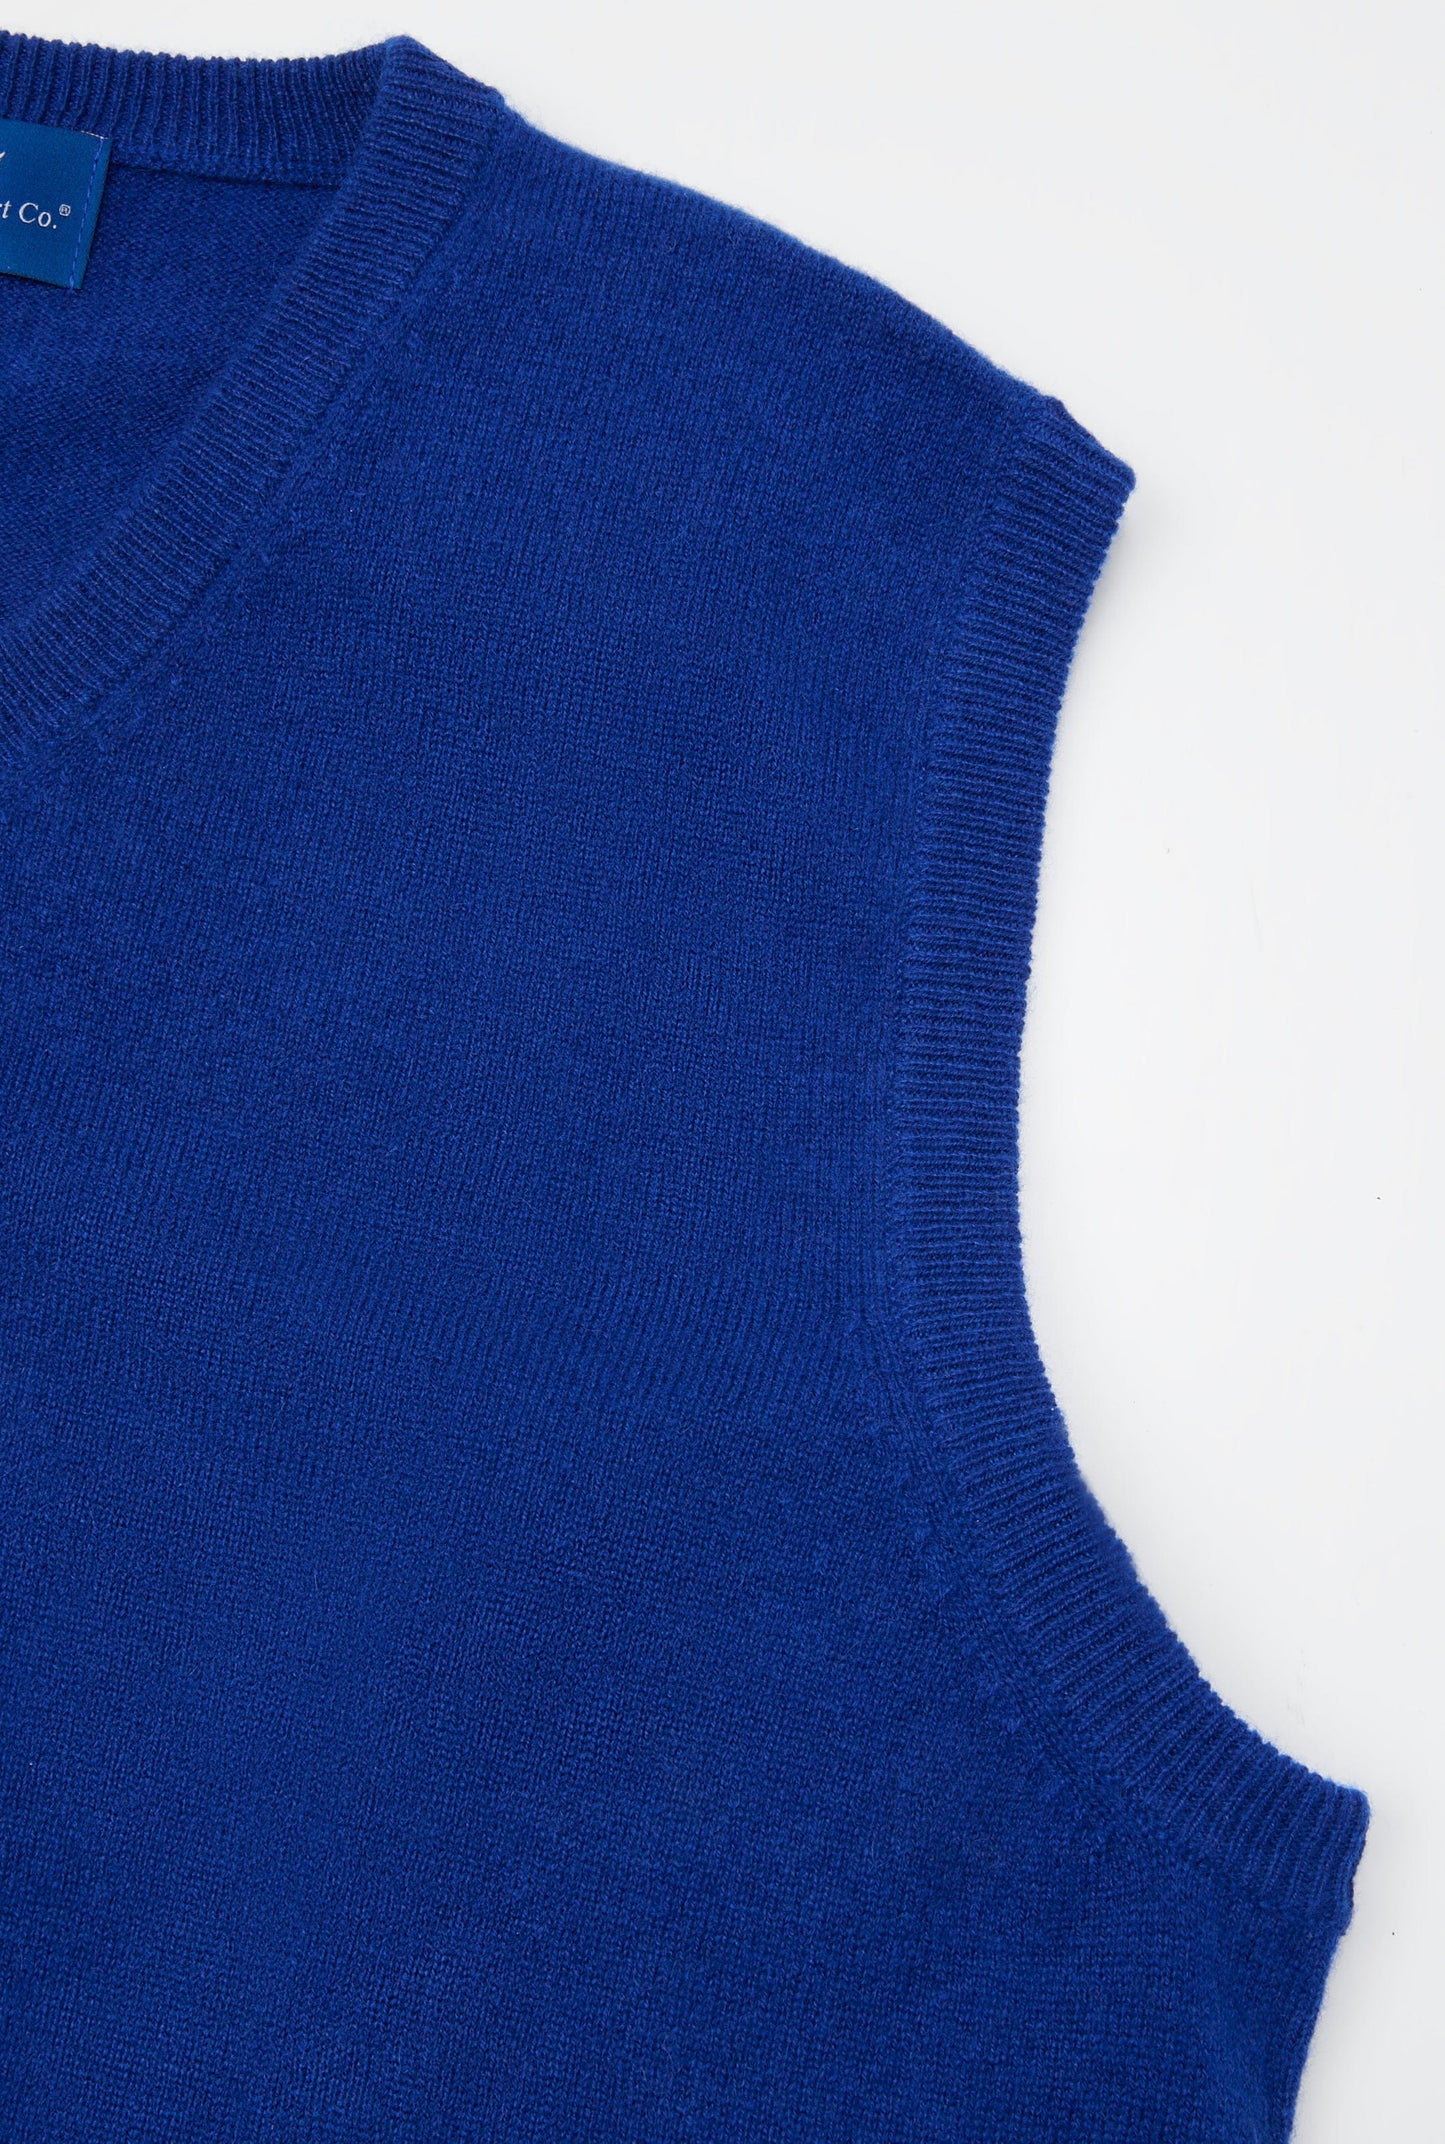 Cashmere Sleeveless in Ultra Blue